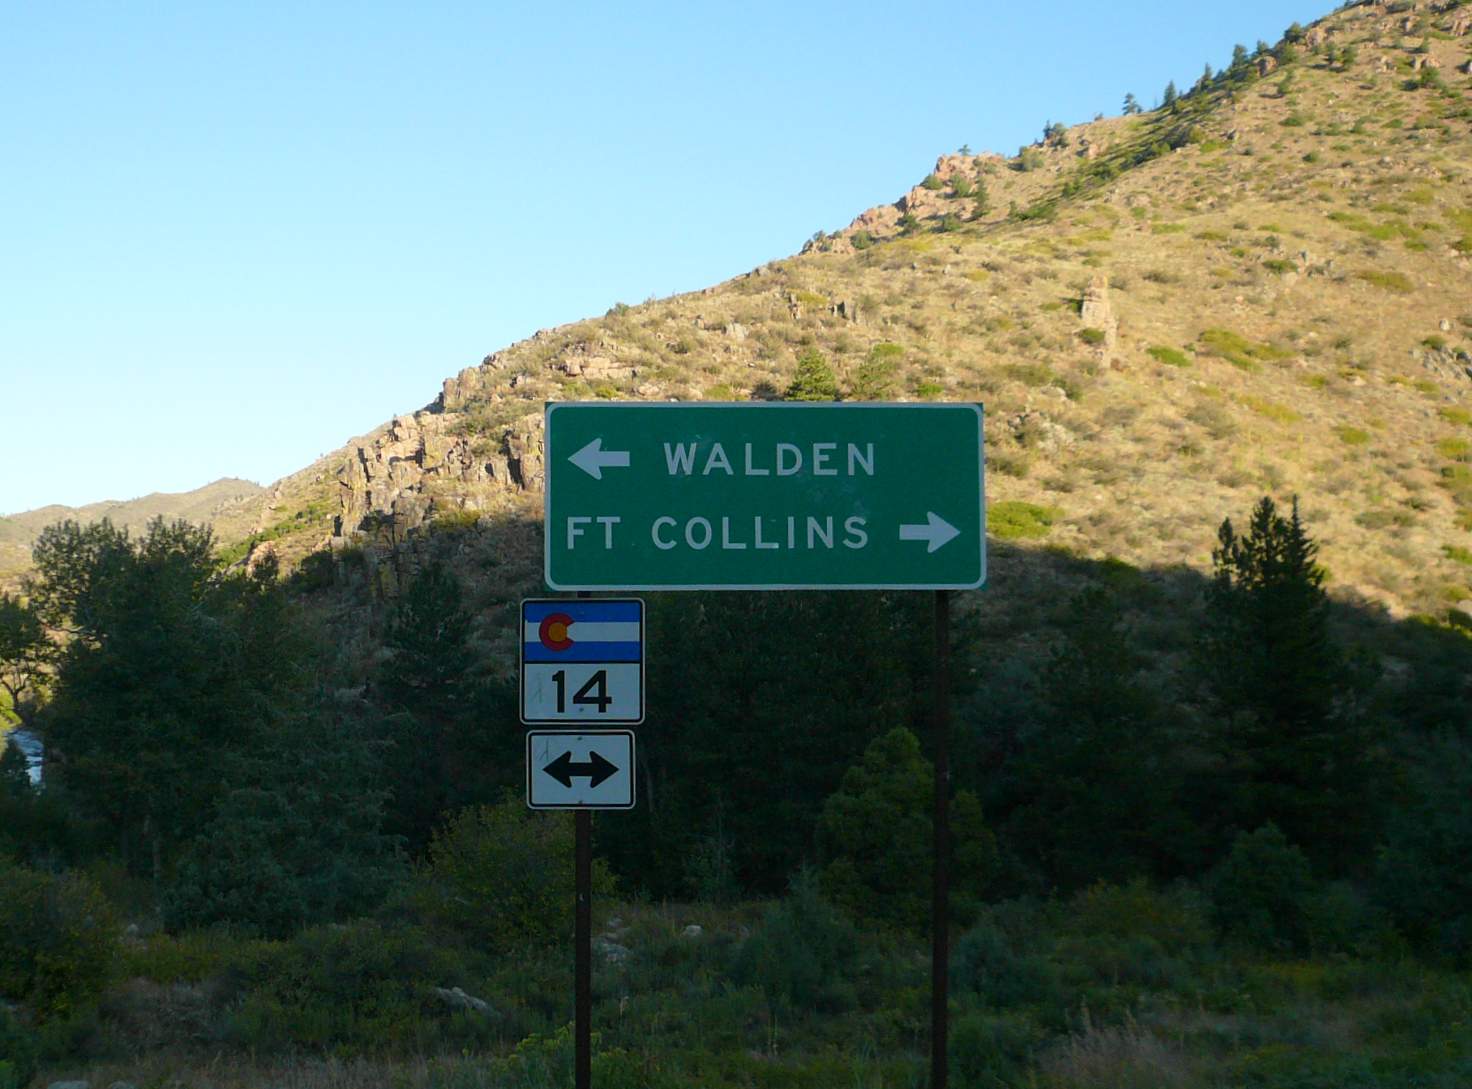 [Mile 27, 7:33 a.m.] Signage to Walden and Fort Collins.